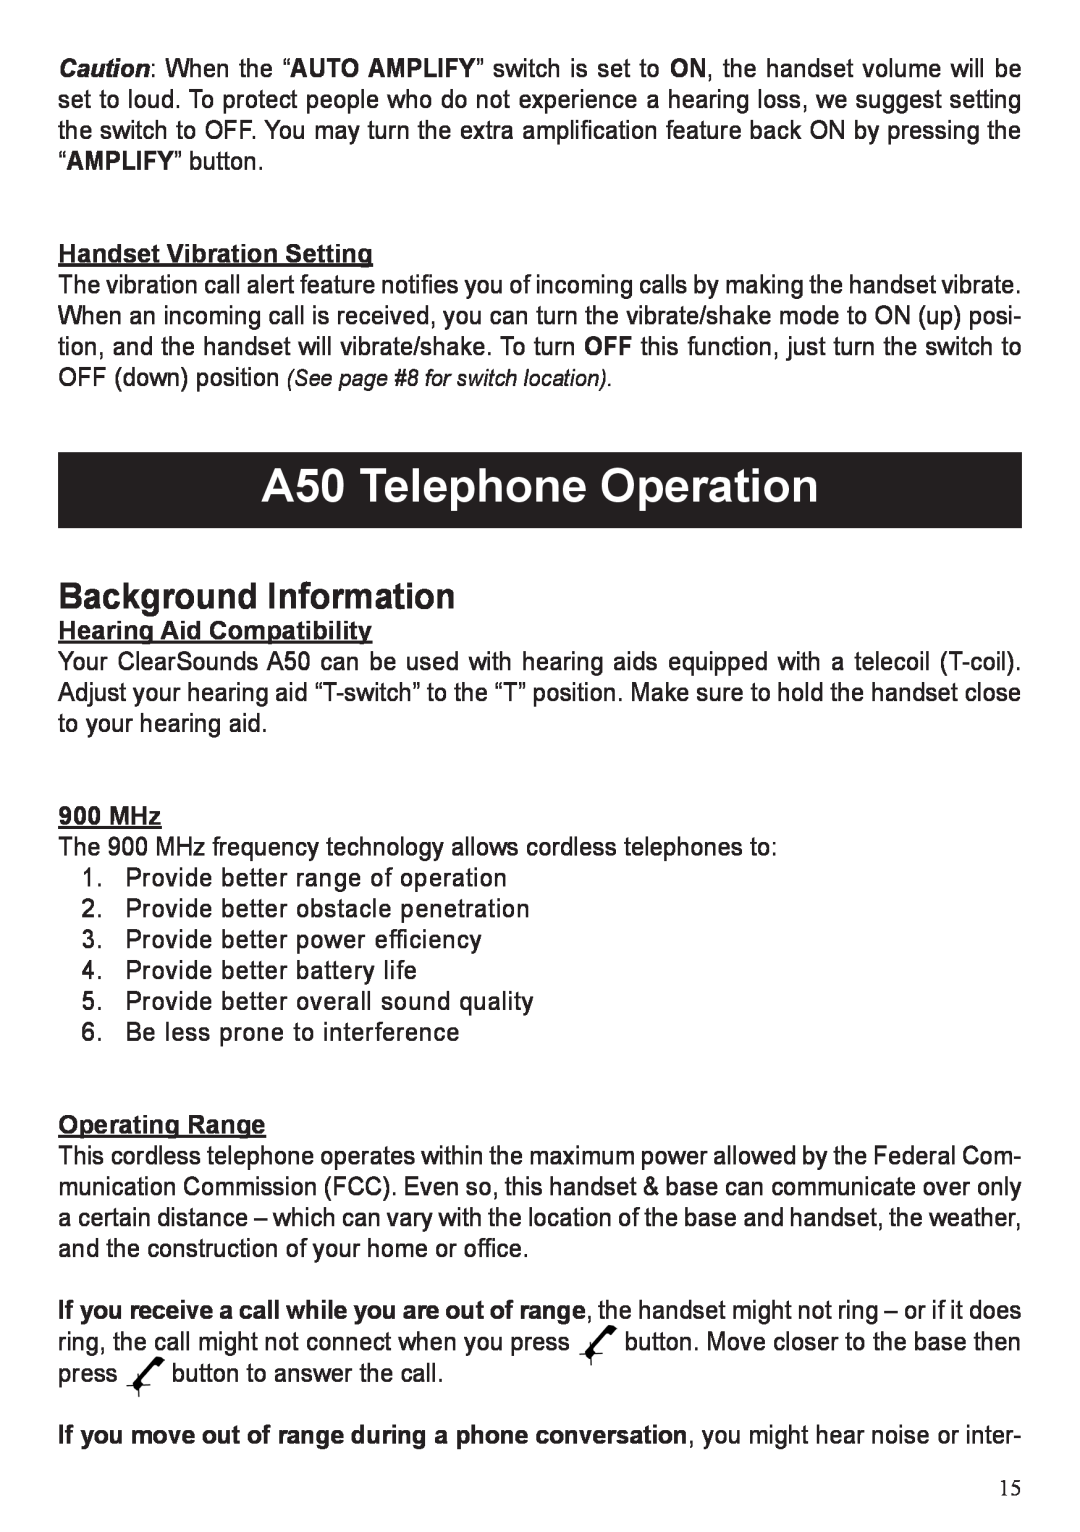 ClearSounds A50 Telephone Operation, Background Information, Handset Vibration Setting, Hearing Aid Compatibility 